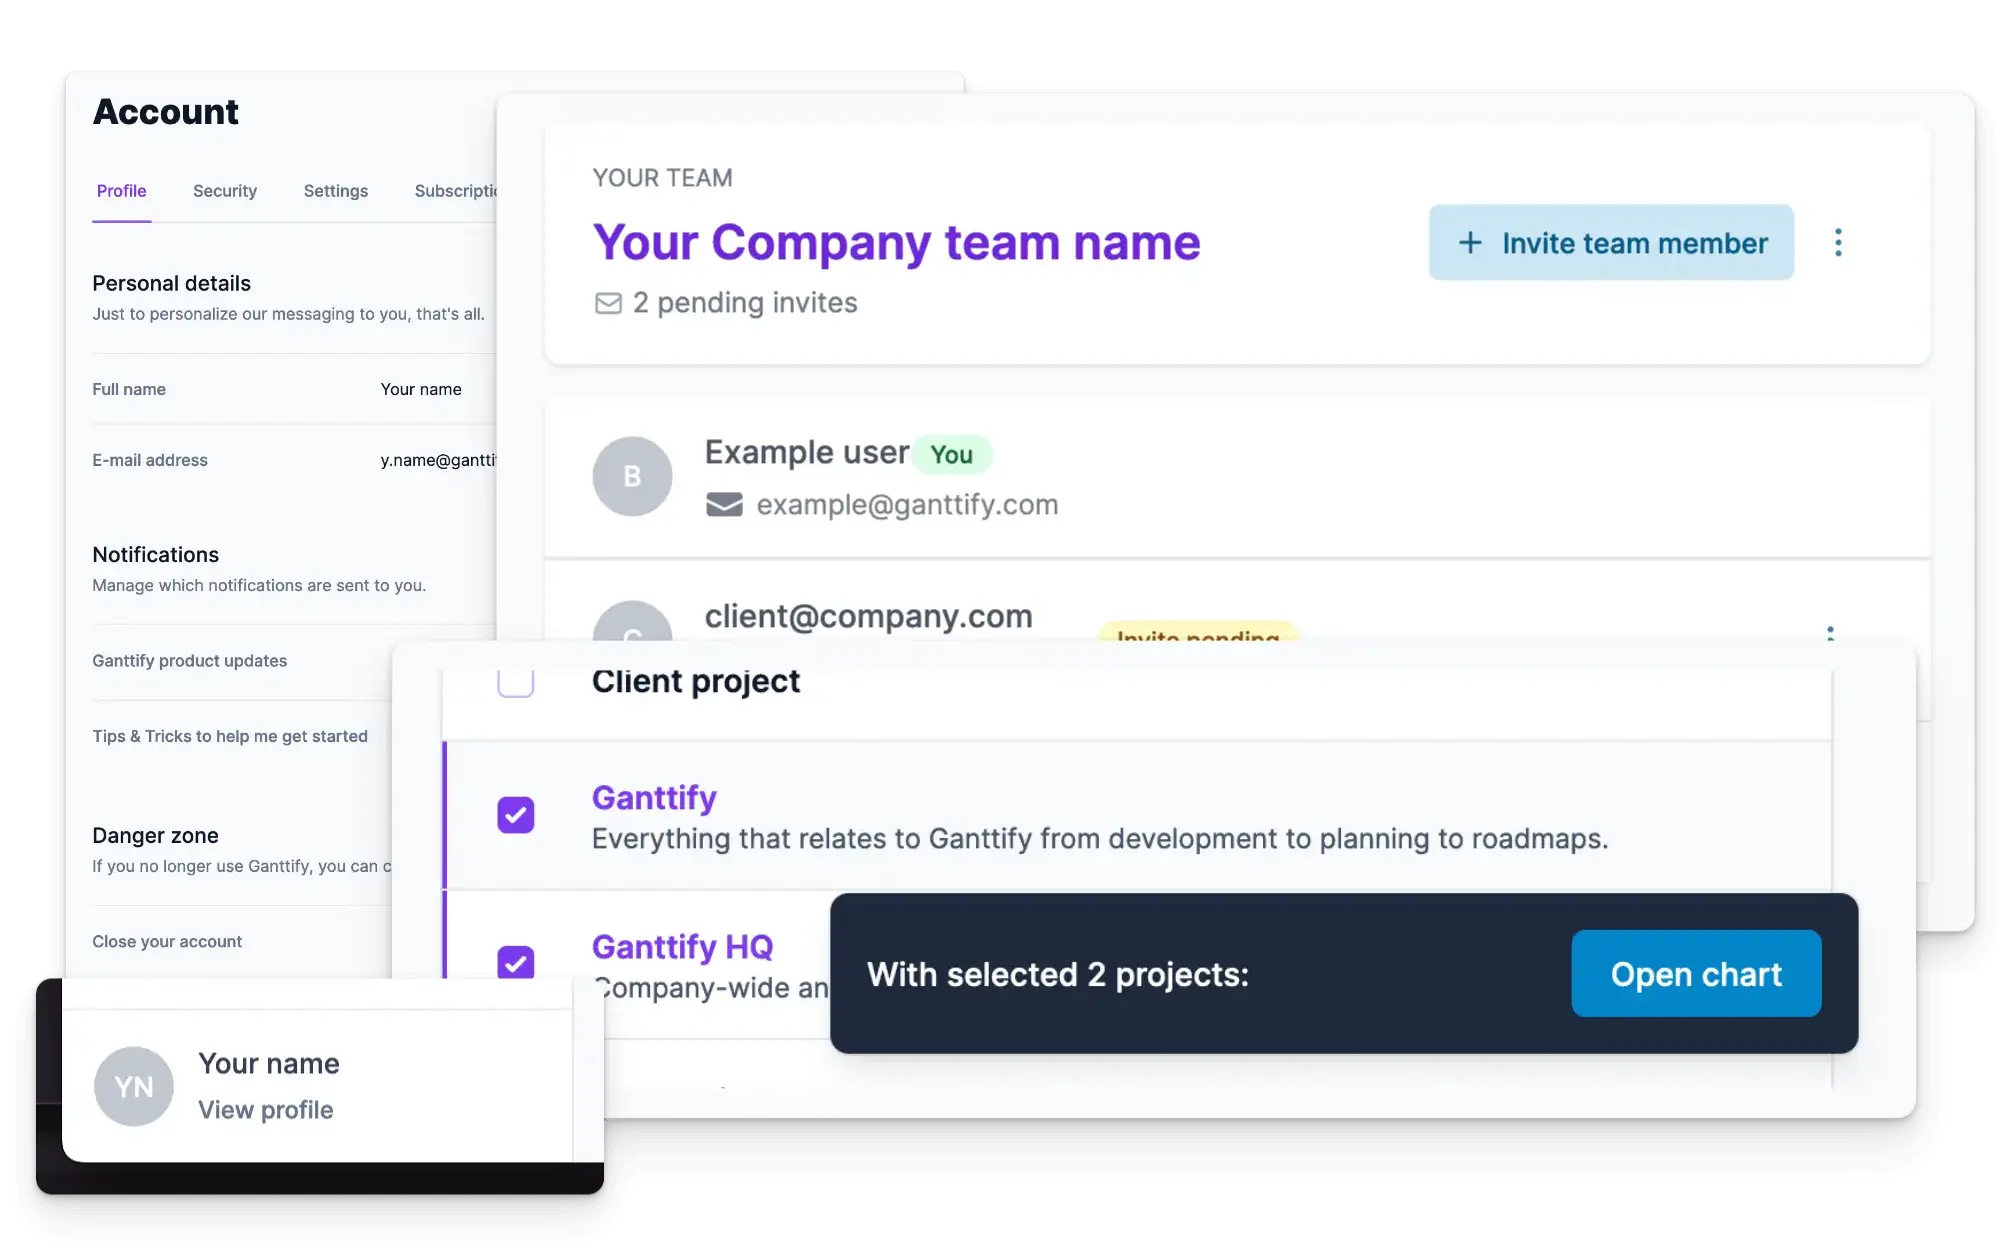 Some highlights of the new look and feel: improved team management, account management in the bottom left and the new project list.